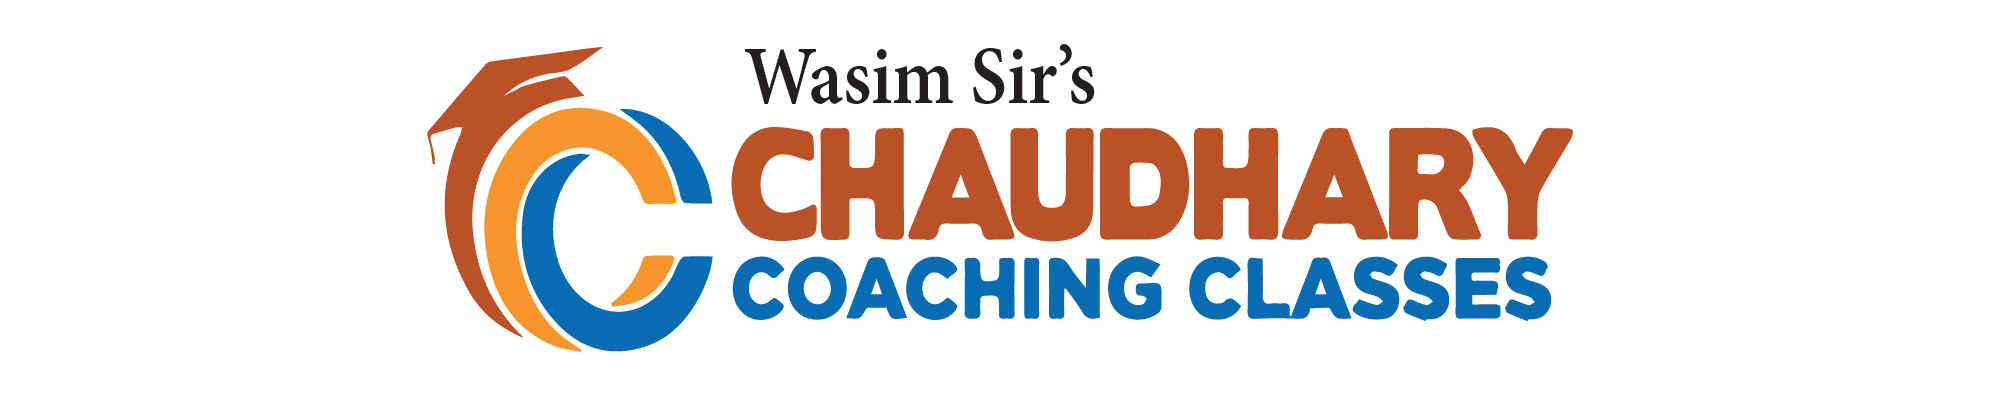 Wasim Sir's Chaudhary Coaching Classes|Education Consultants|Education